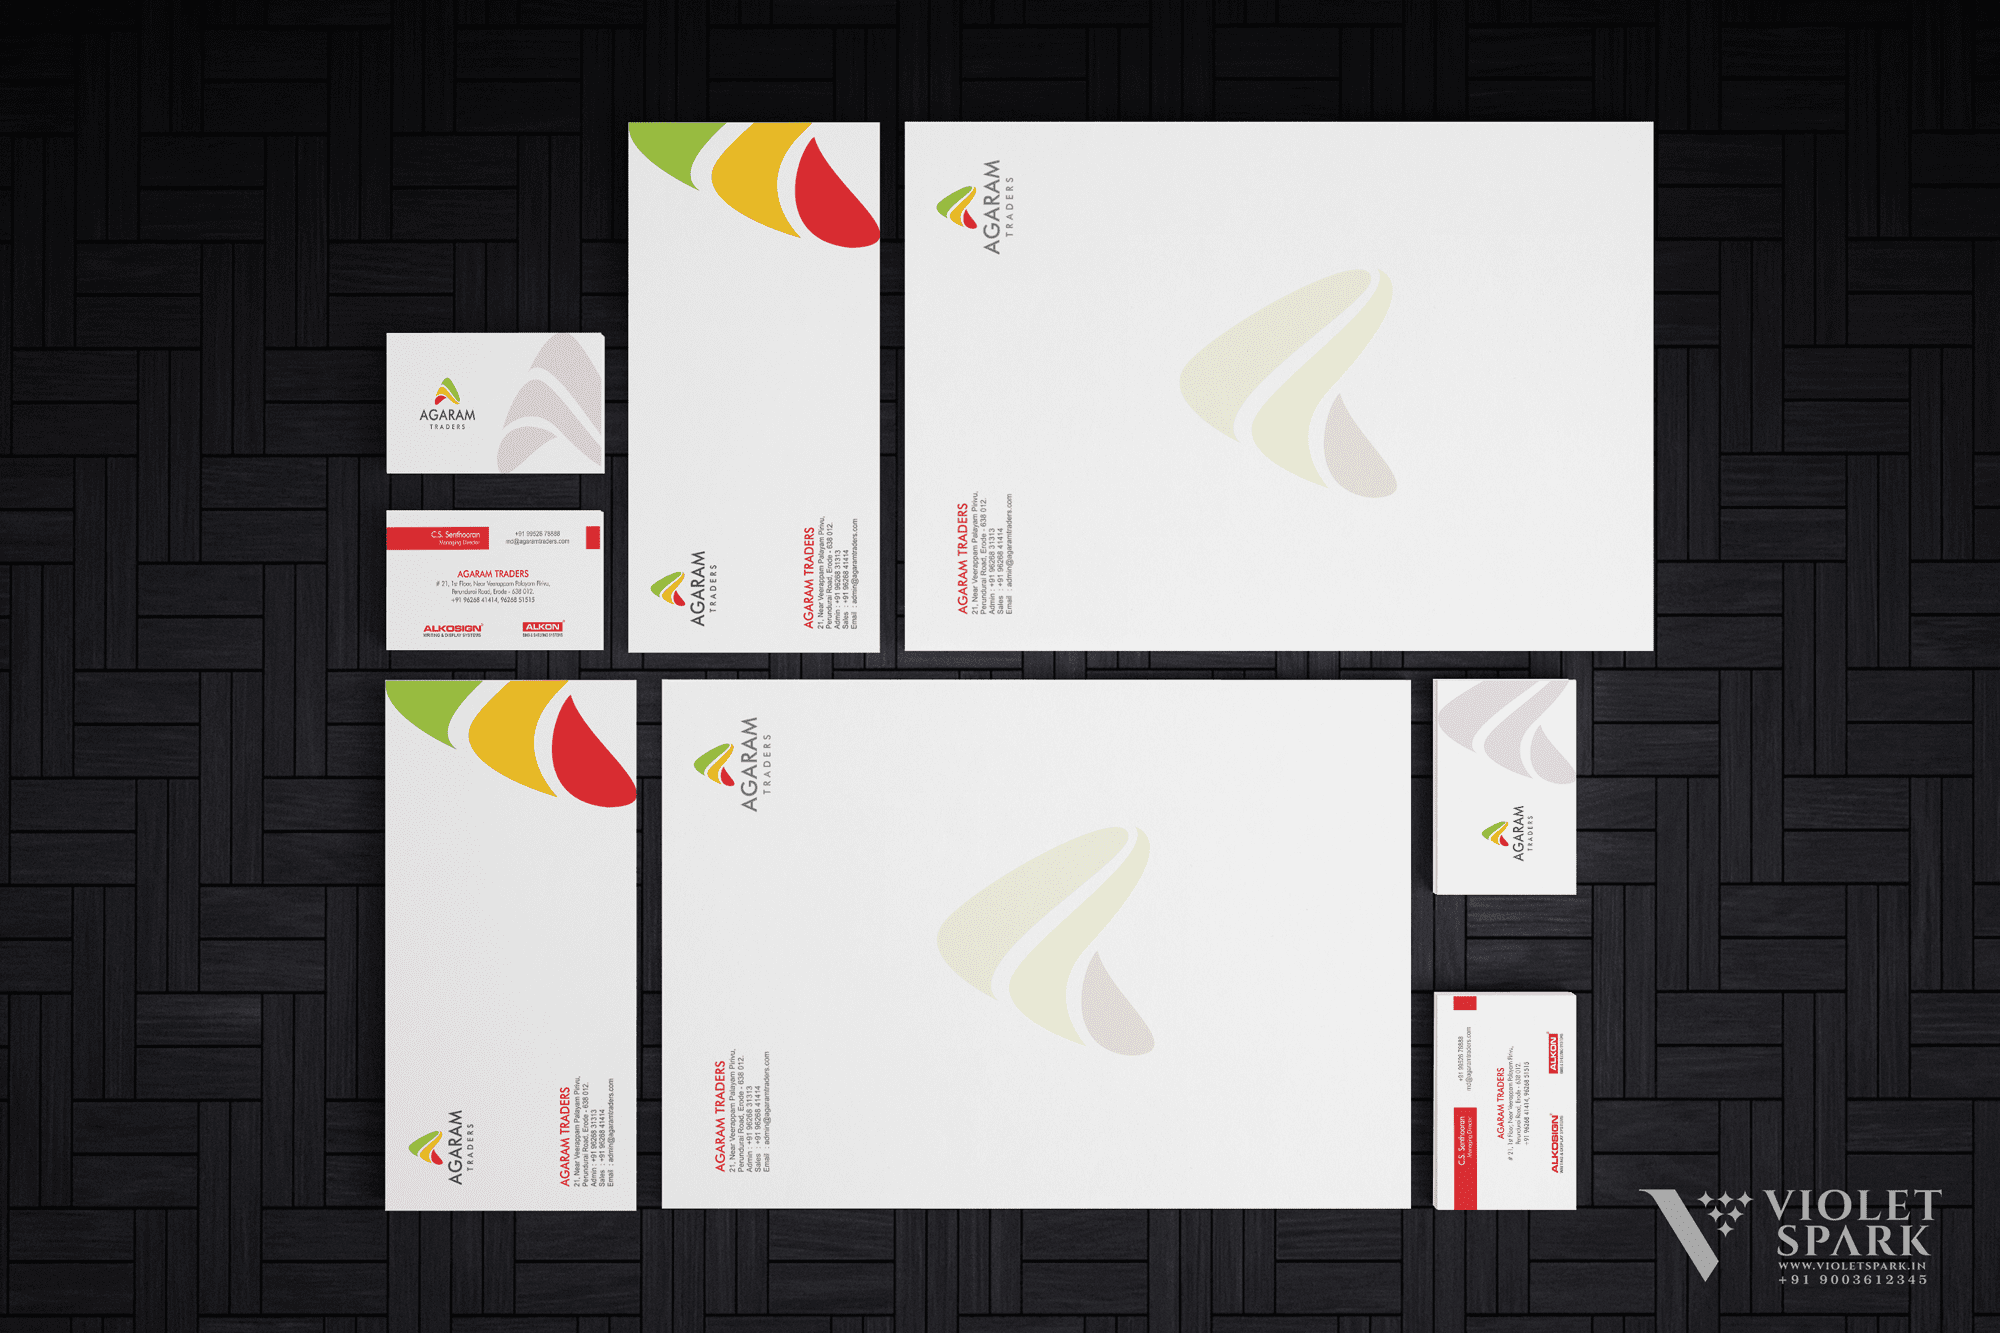 Agaram Traders Stationary Design Branding & Packaging Design in Tiruppur by Creative Prints thecreativeprints